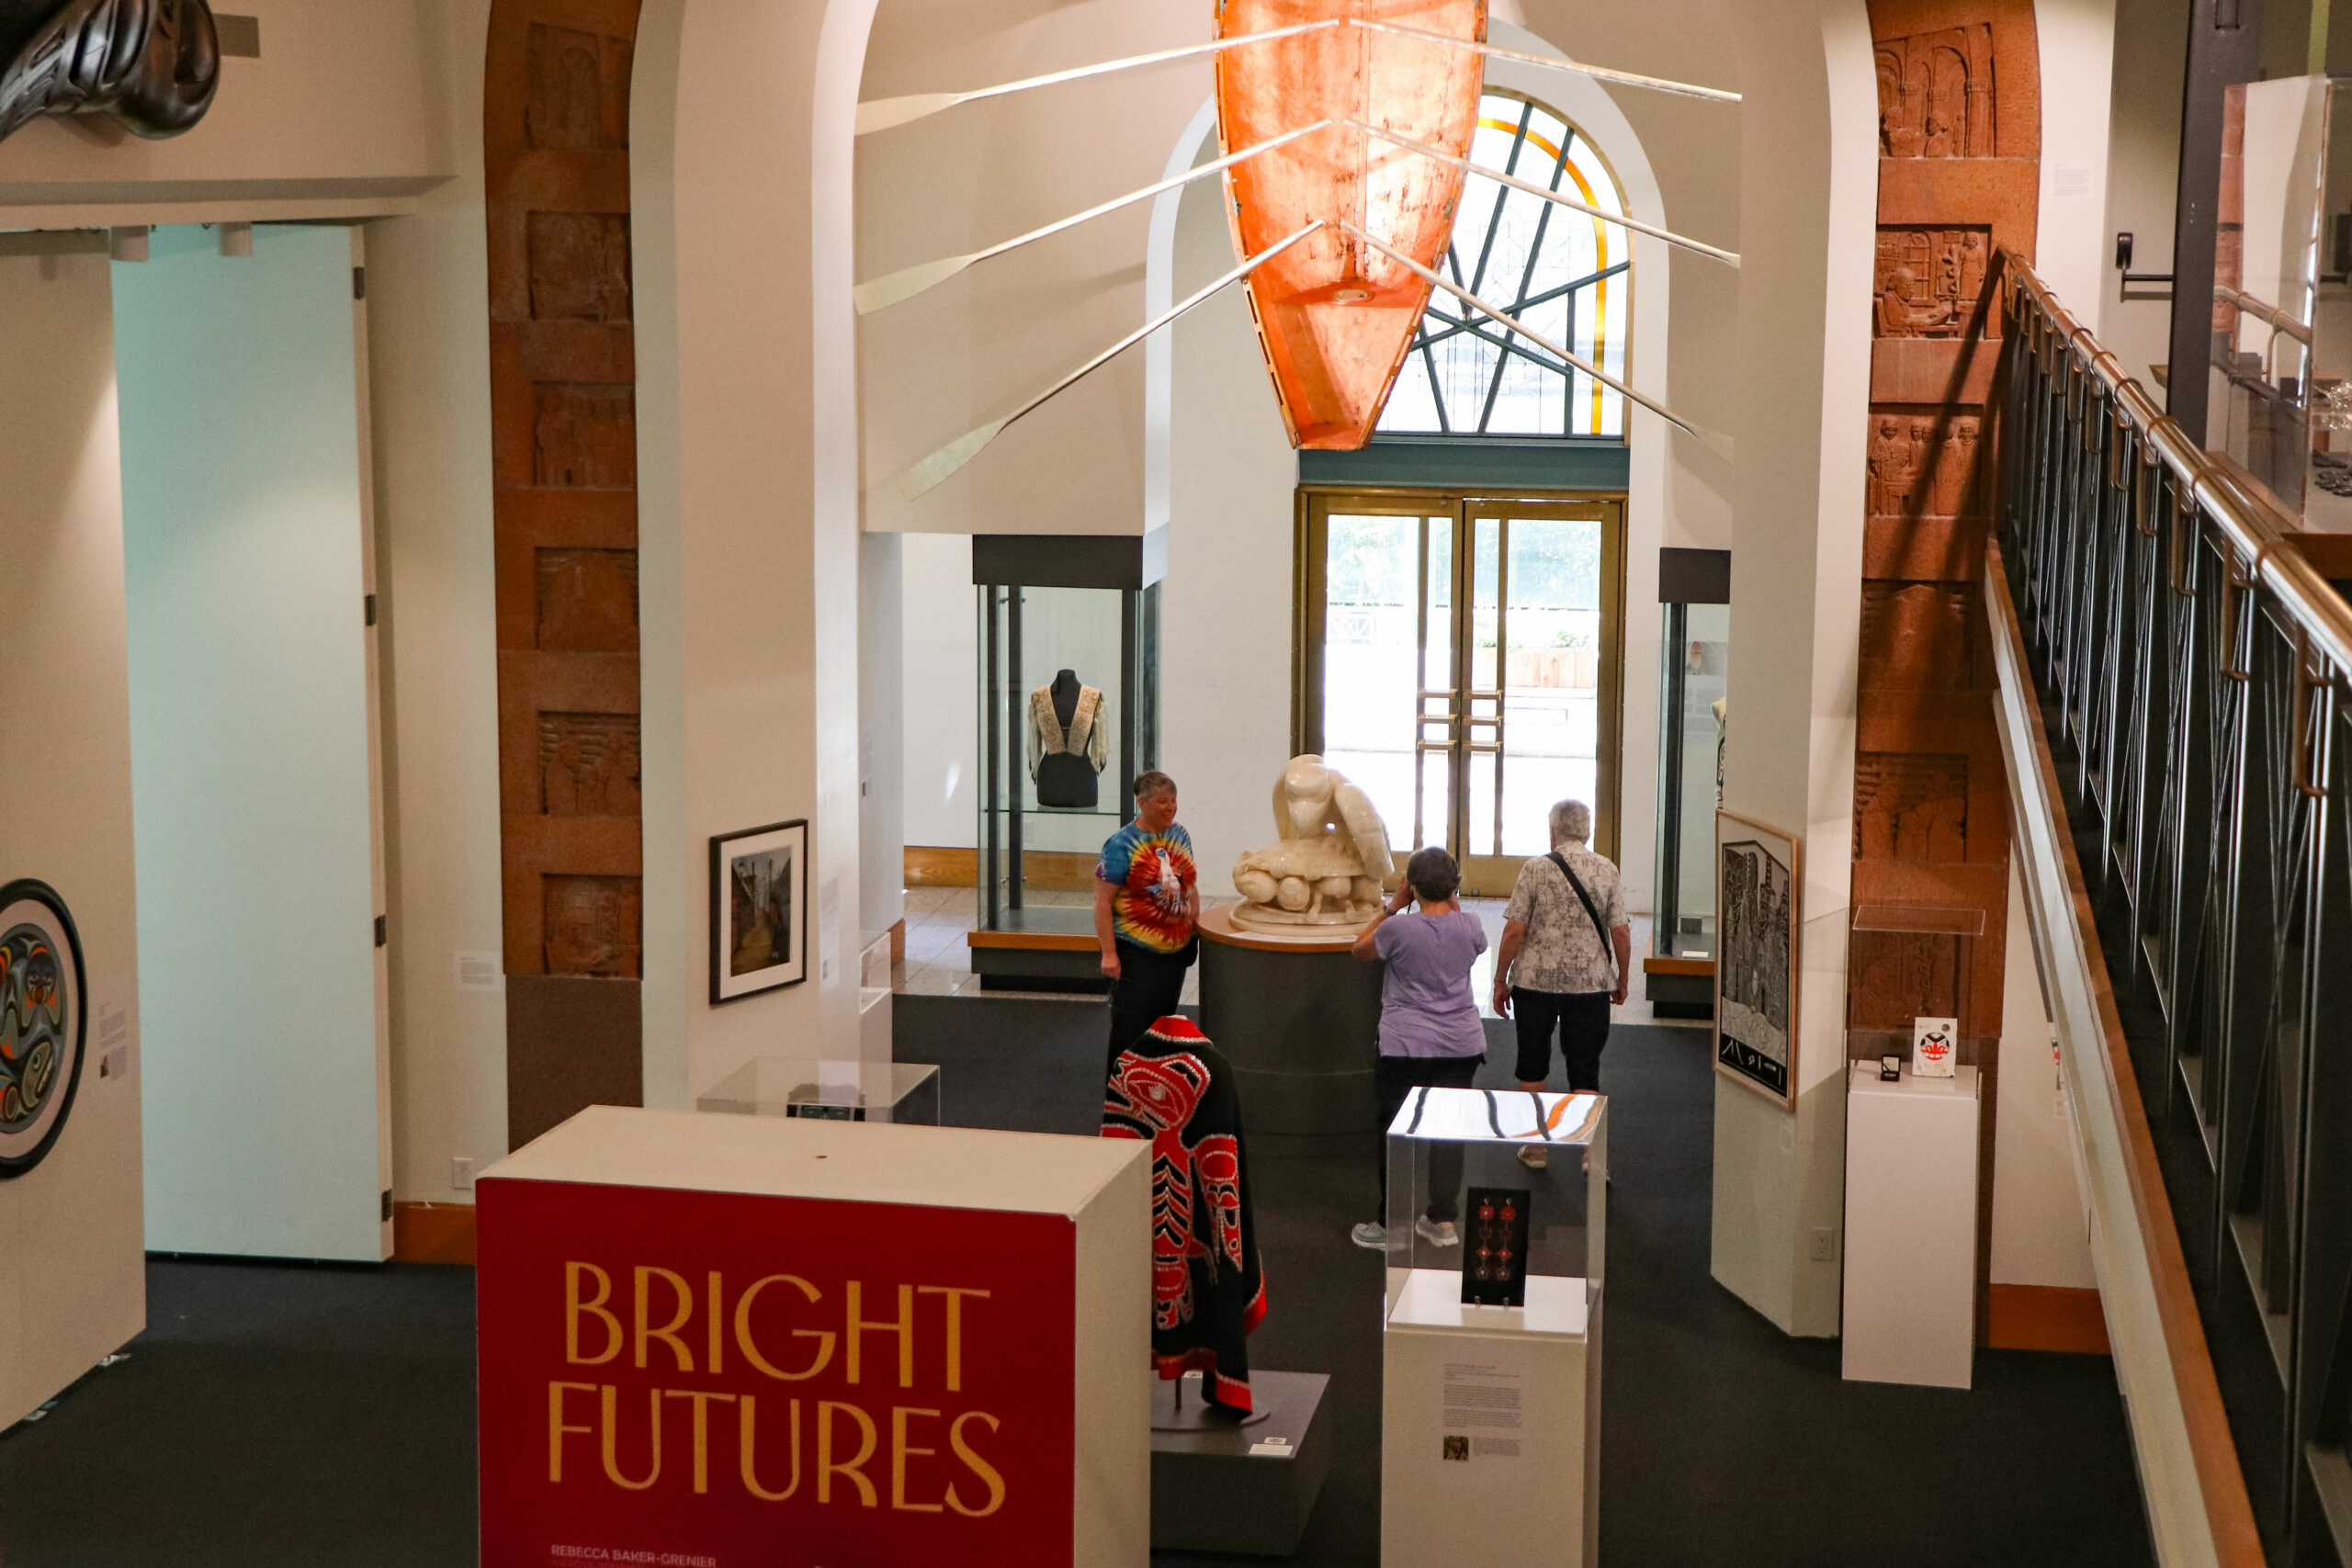 A photo taken from the mezzanine of a portion of the interior of the Bill Reid Gallery below. There is a bright salmon-coloured canoe with rows hanging from the ceiling, illuminated by sunlight through the windows. A large board in the middle of the space that read “Bright Futures.” There are various artworks behind glass and people are walking around, looking.